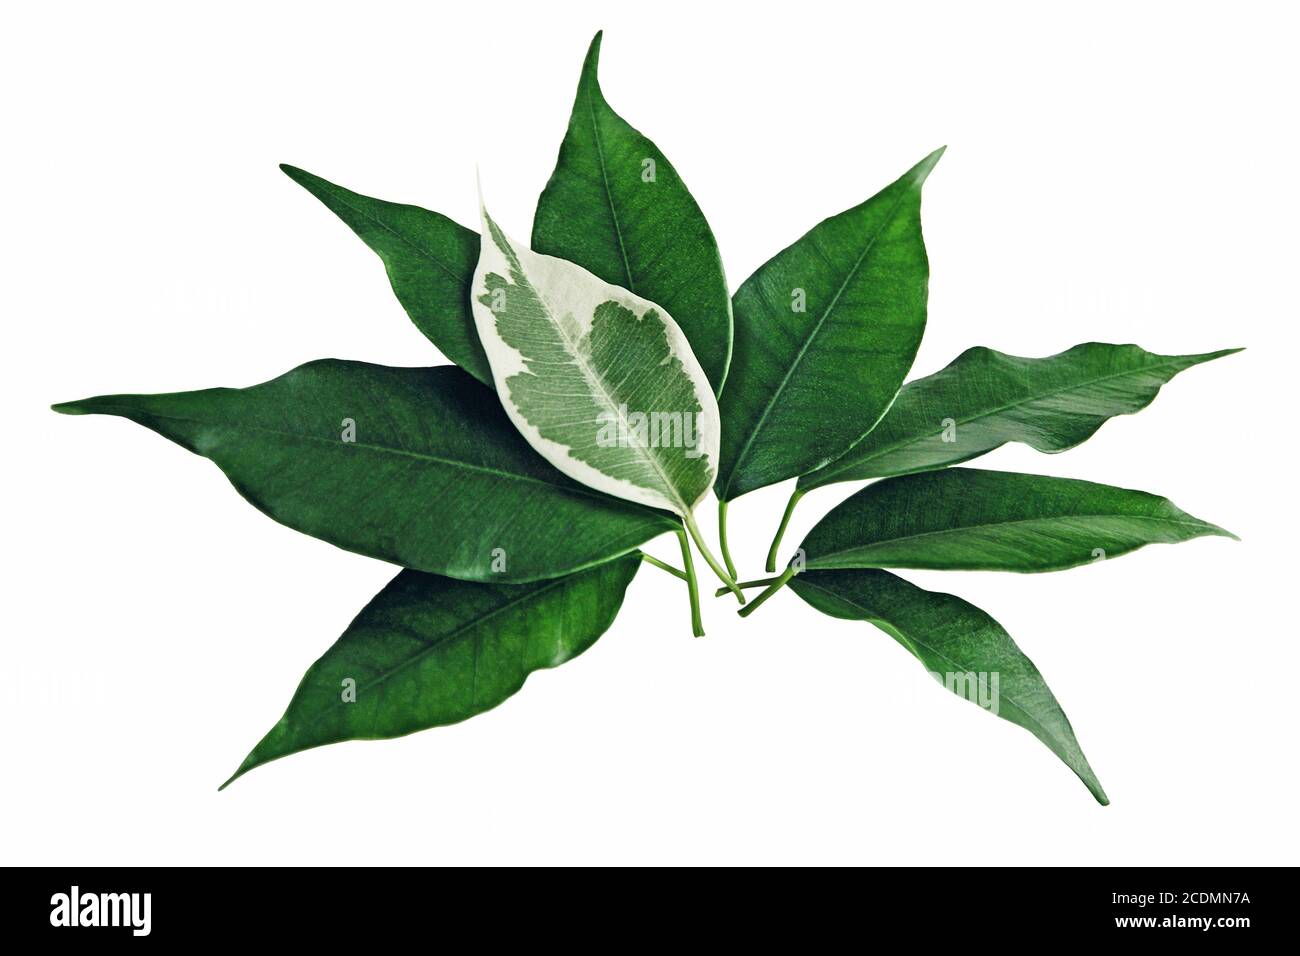 Ficus benjamina green leaves with one spotted leaf on top, isolated on white Stock Photo